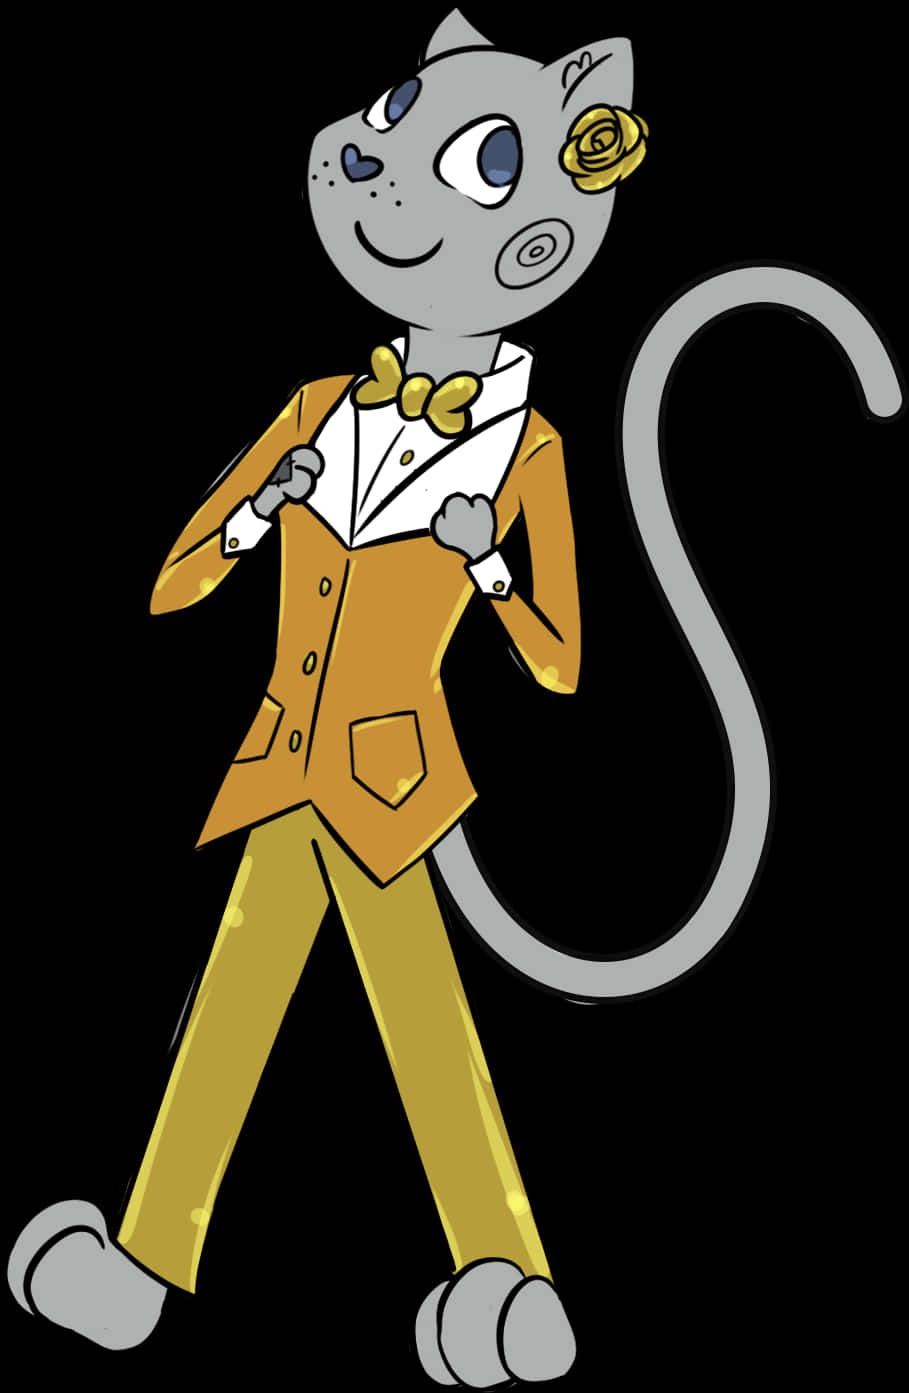 A Cartoon Of A Mouse Wearing A Suit